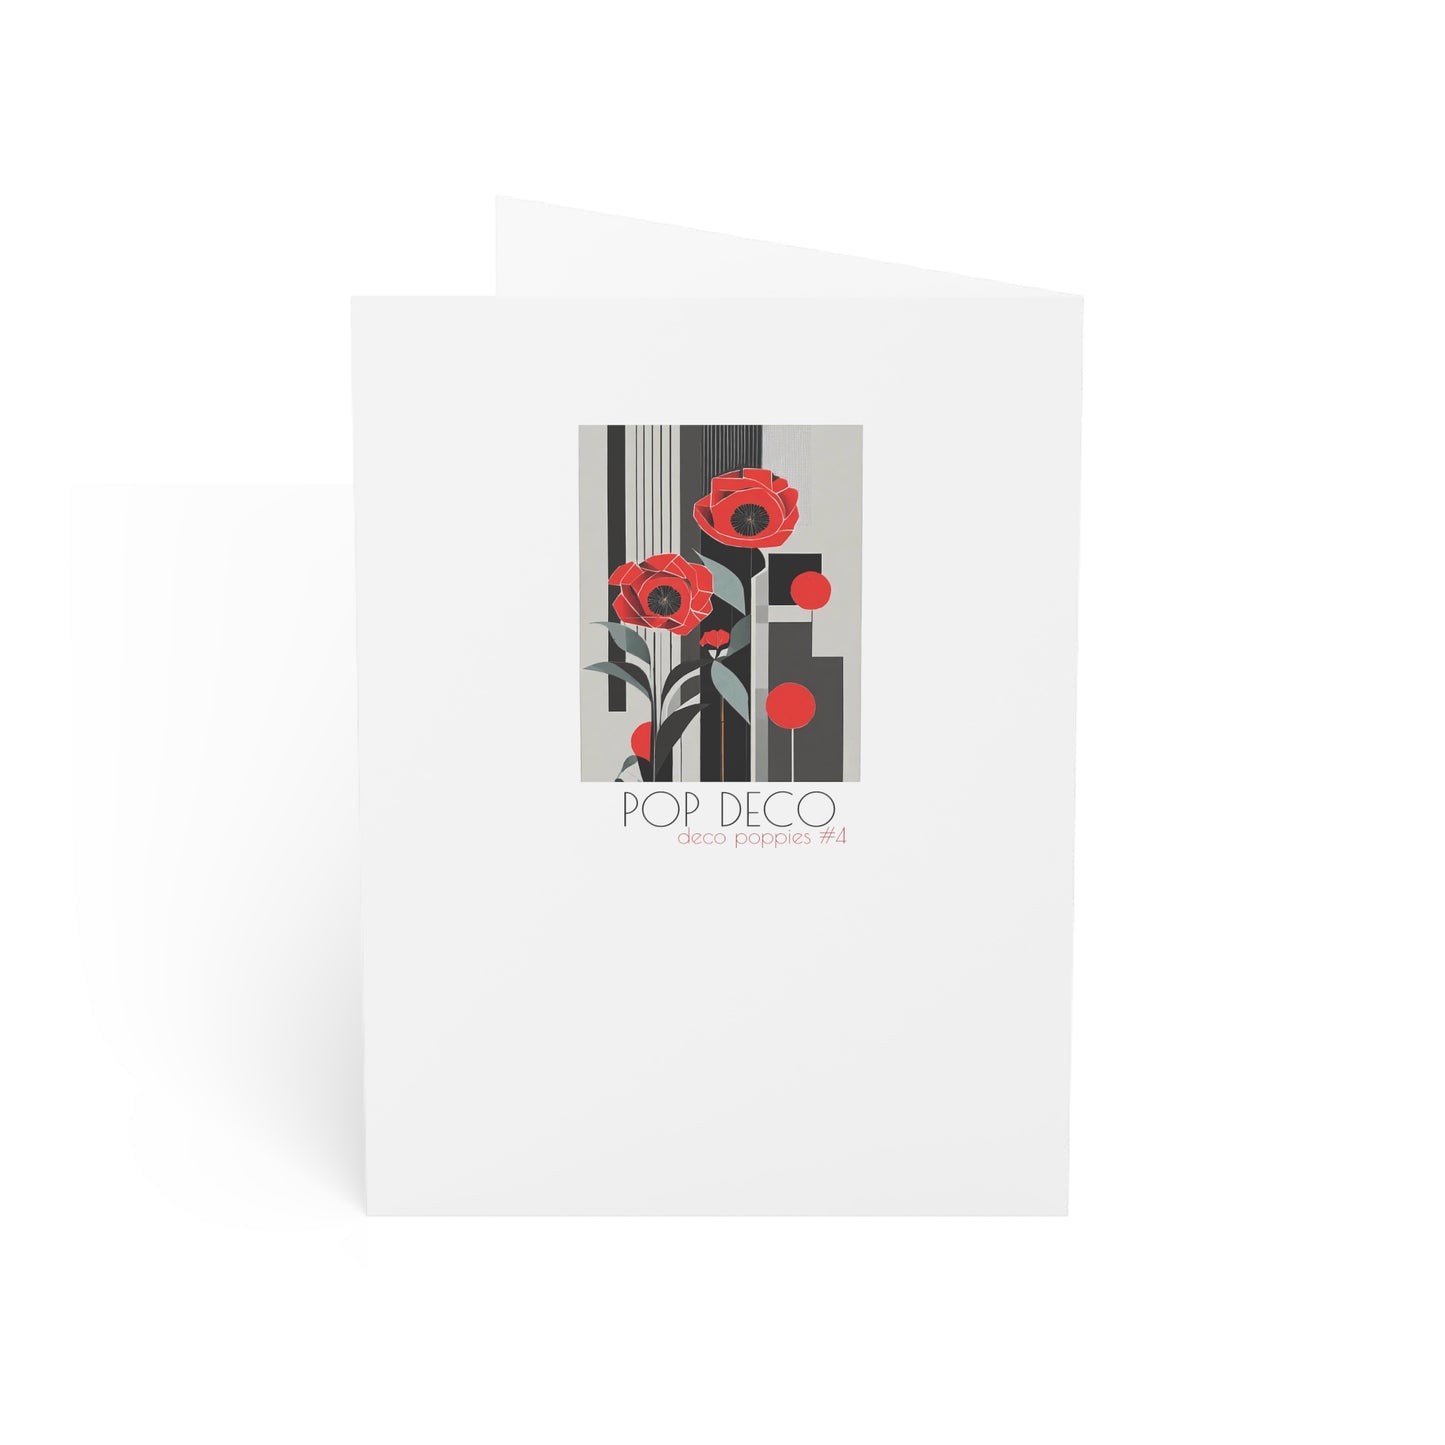 Abstract Flower Birthday Card Art Deco Red Poppies Note Card Red Flowers Art Deco Poppy Minimalist Red Flower Card for Mother's Day Card